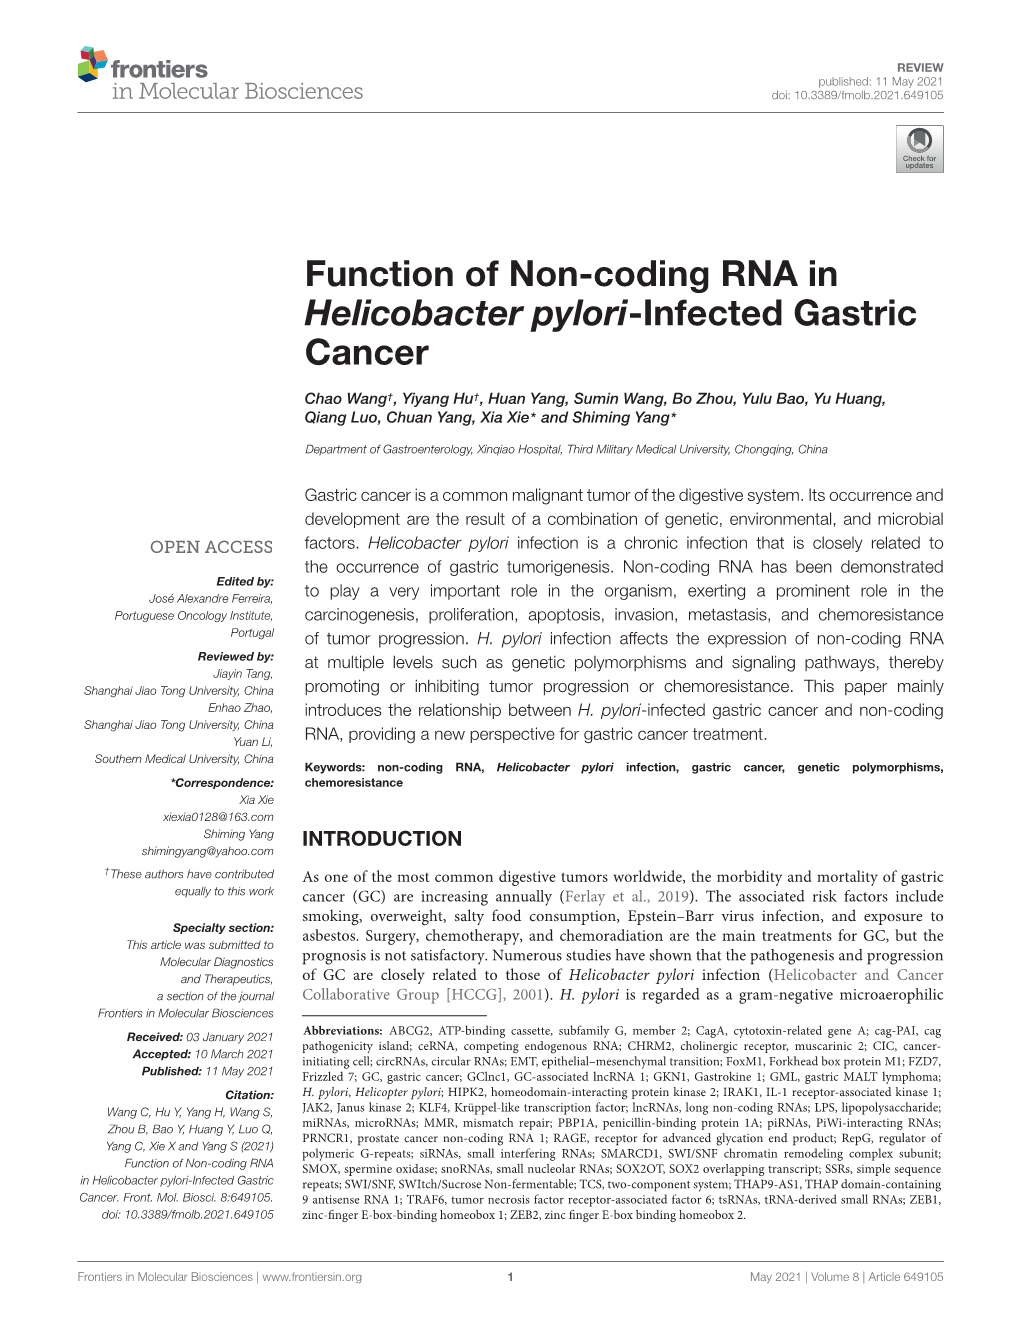 Function of Non-Coding RNA in Helicobacter Pylori-Infected Gastric Cancer